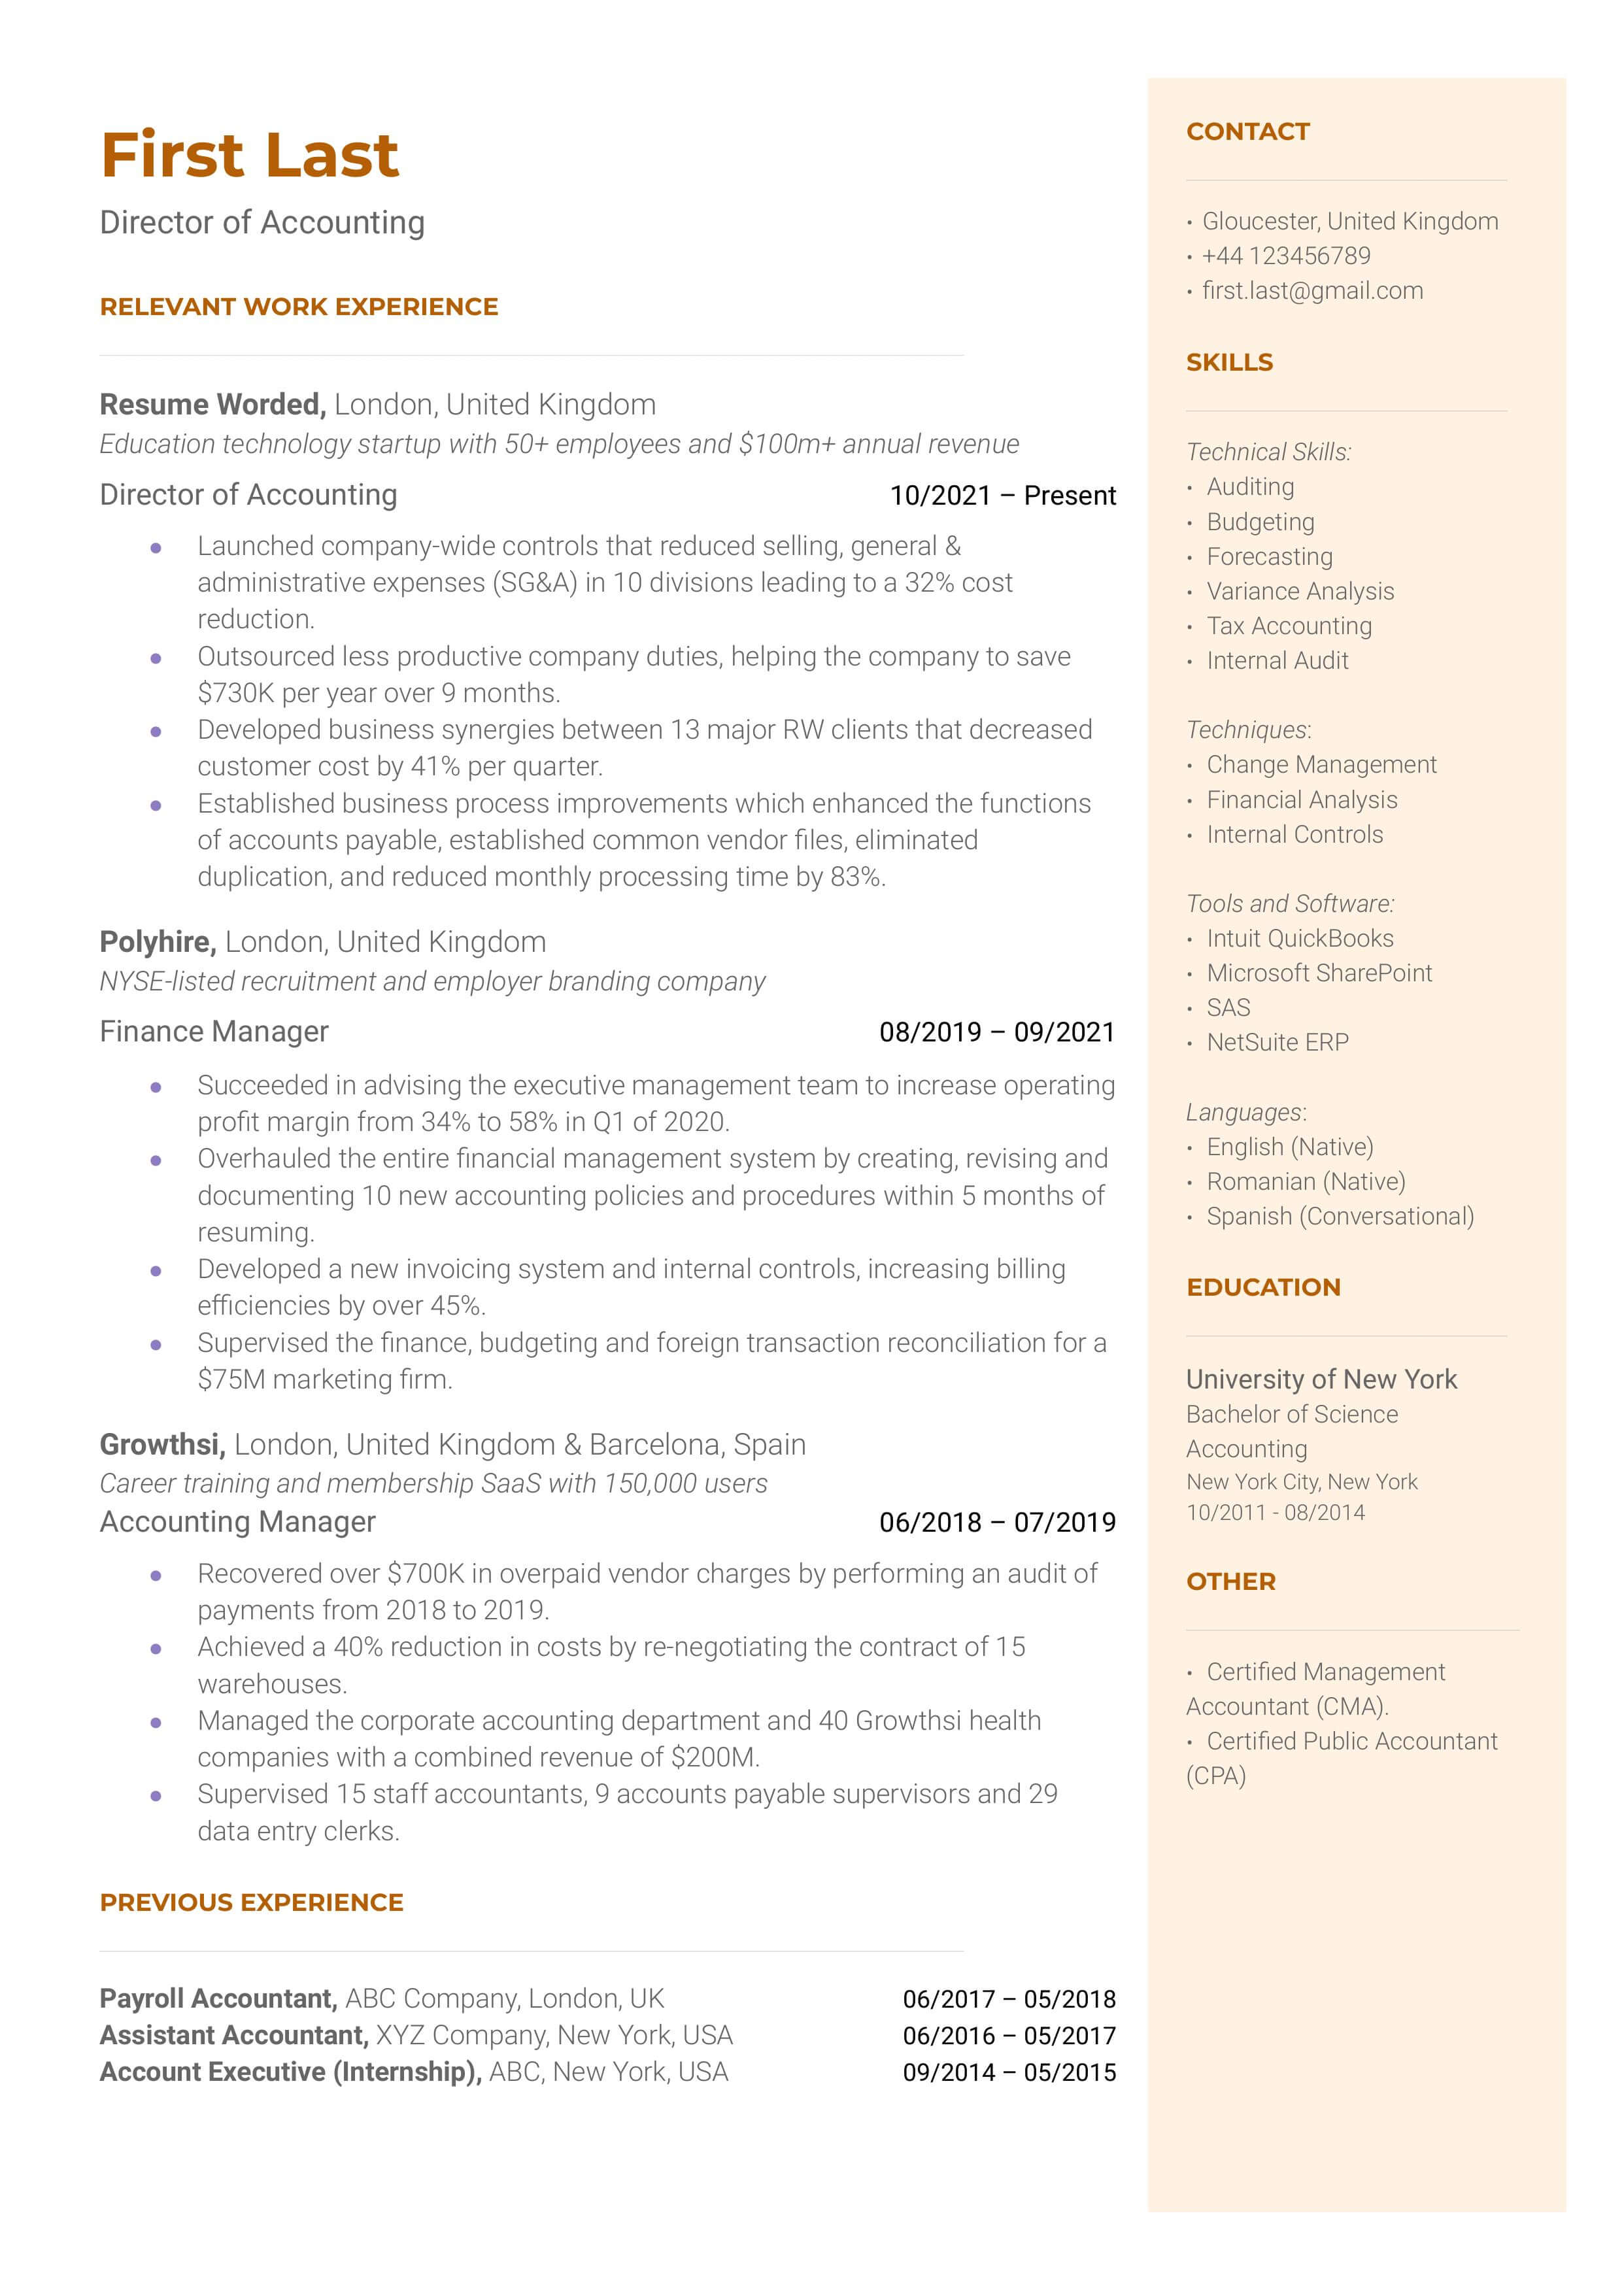 A well-structured CV of a potential Director of Accounting showcasing technical proficiency and leadership skills.